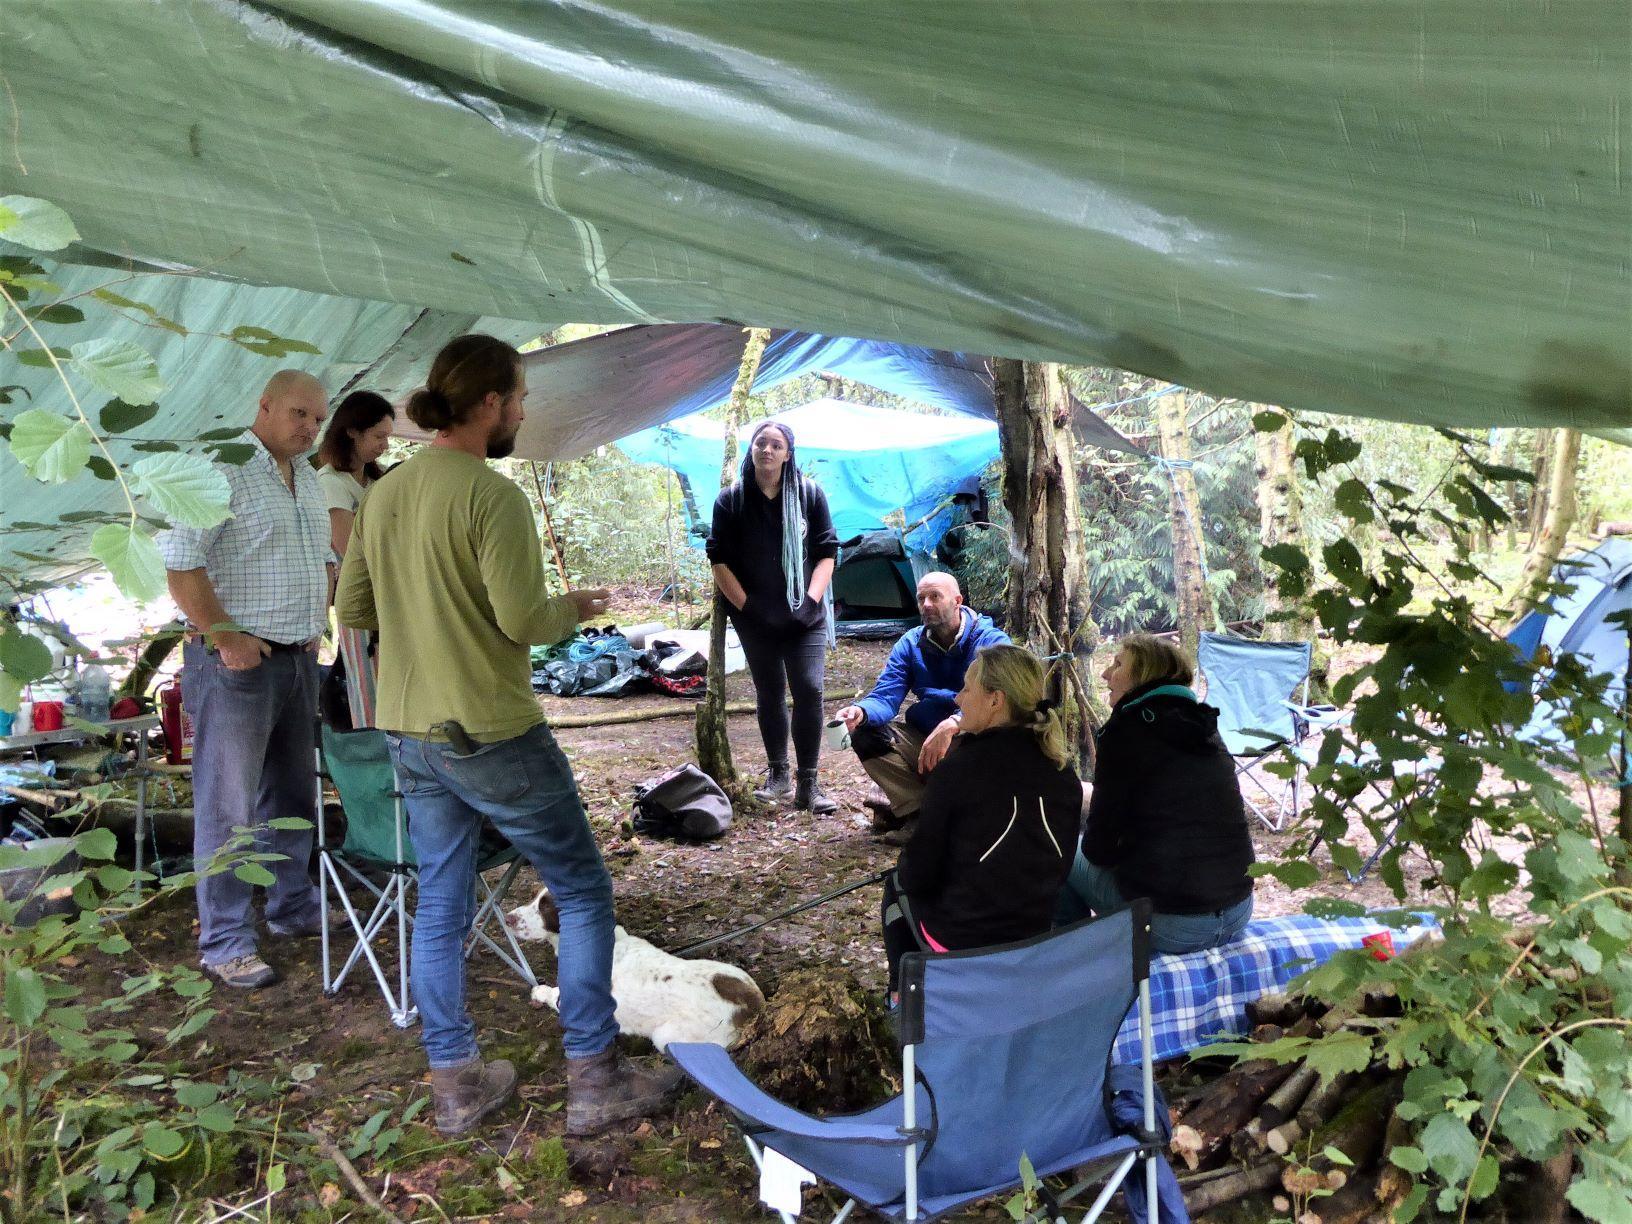 In October, protest camps were set up in South Cubbington Wood (pictured) and Crackley Woods to stop HS2 workers destroying the ancient woodlands, to make way for the high speed rail line. Currently, work is 'on hold' as the Government review the plans but trees are still being felled across the district.